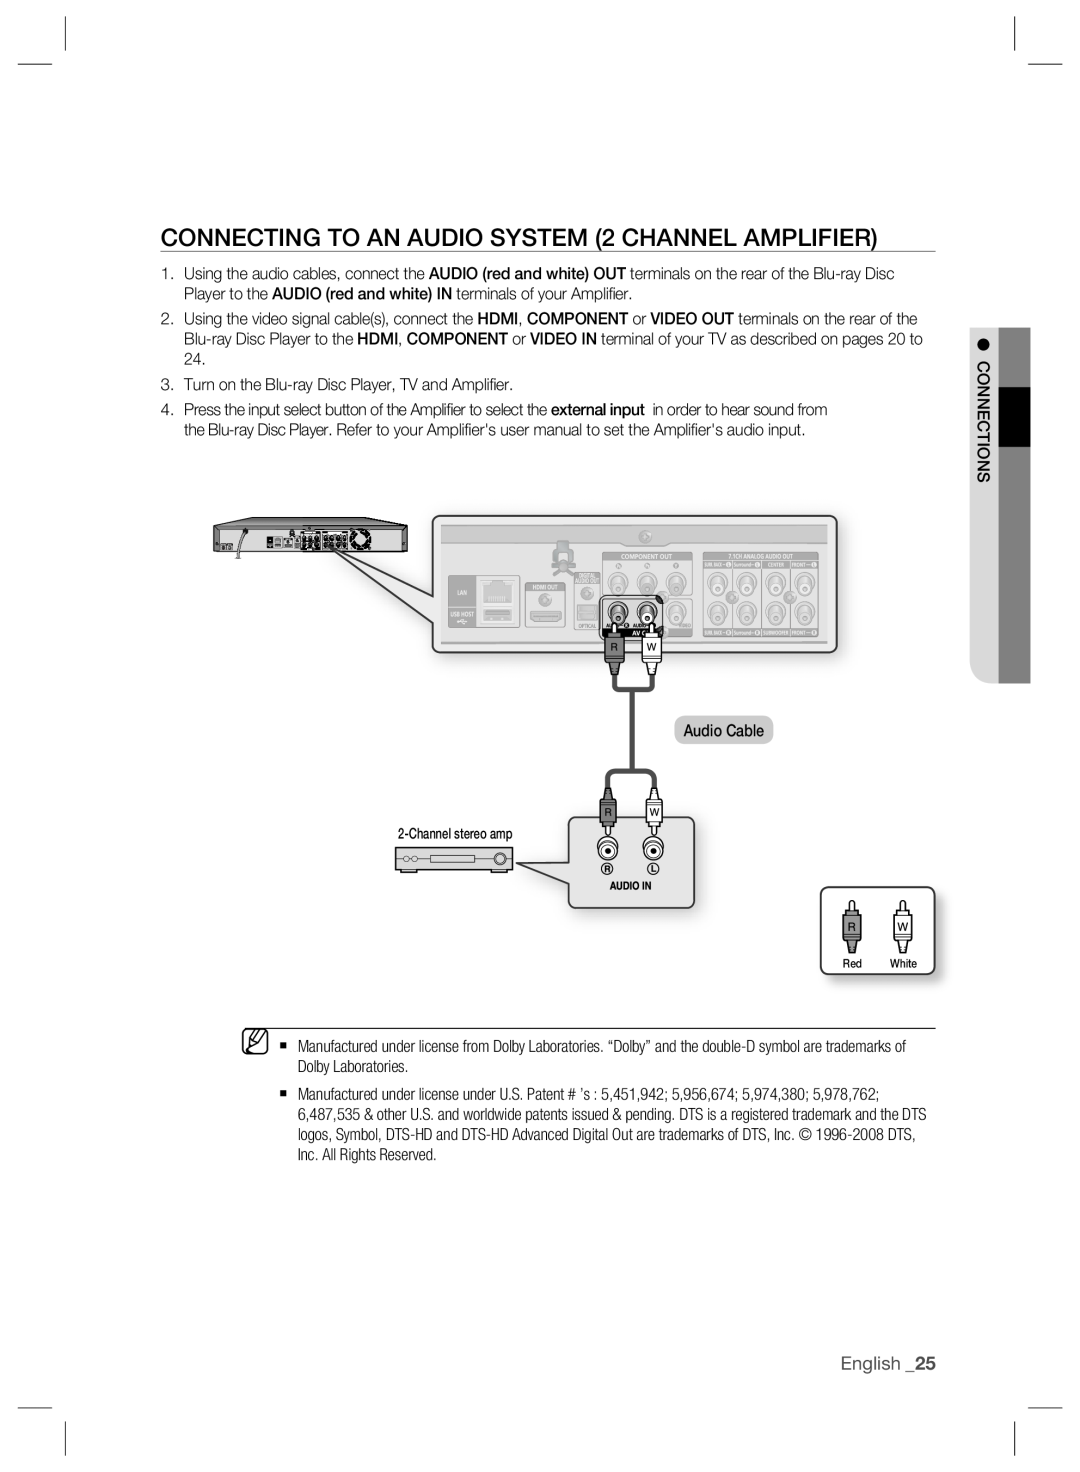 Samsung BD-P2500/XEF, BD-P2500/EDC manual CONNECTING TO AN AUDIO SYSTEM 2 CHANNEL AMPLIFIER, English, Channel stereo amp 